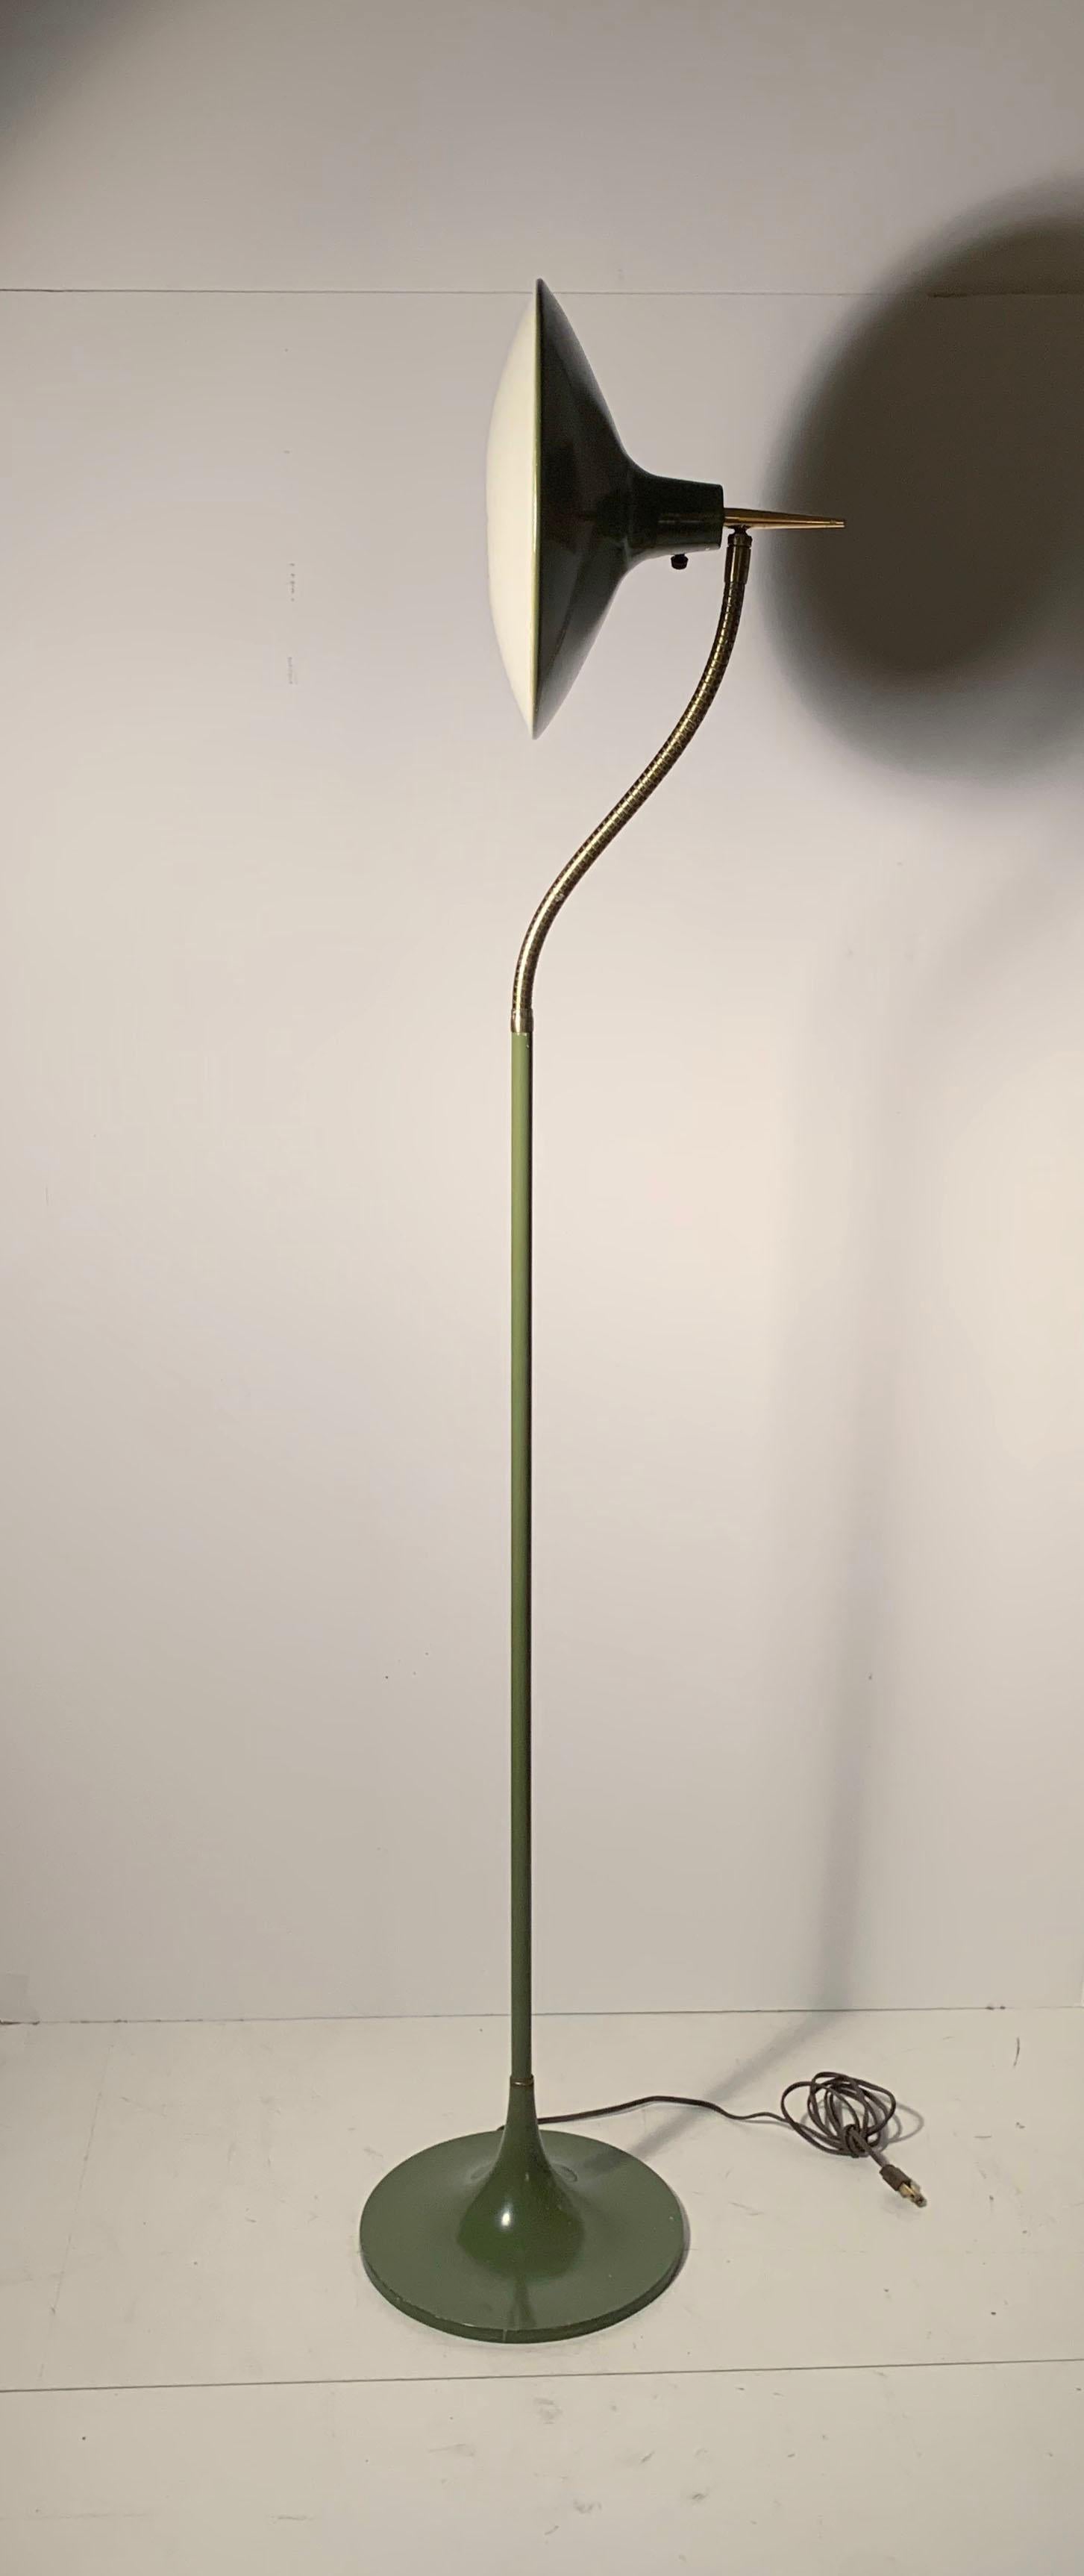 Vintage Laurel Gooseneck floor lamp Model B- 683 in a Olive type color. Sometimes referred to as bing in the style of Gio Ponti. 

Original plastic diffuser included but does have some damage as shown. 

12